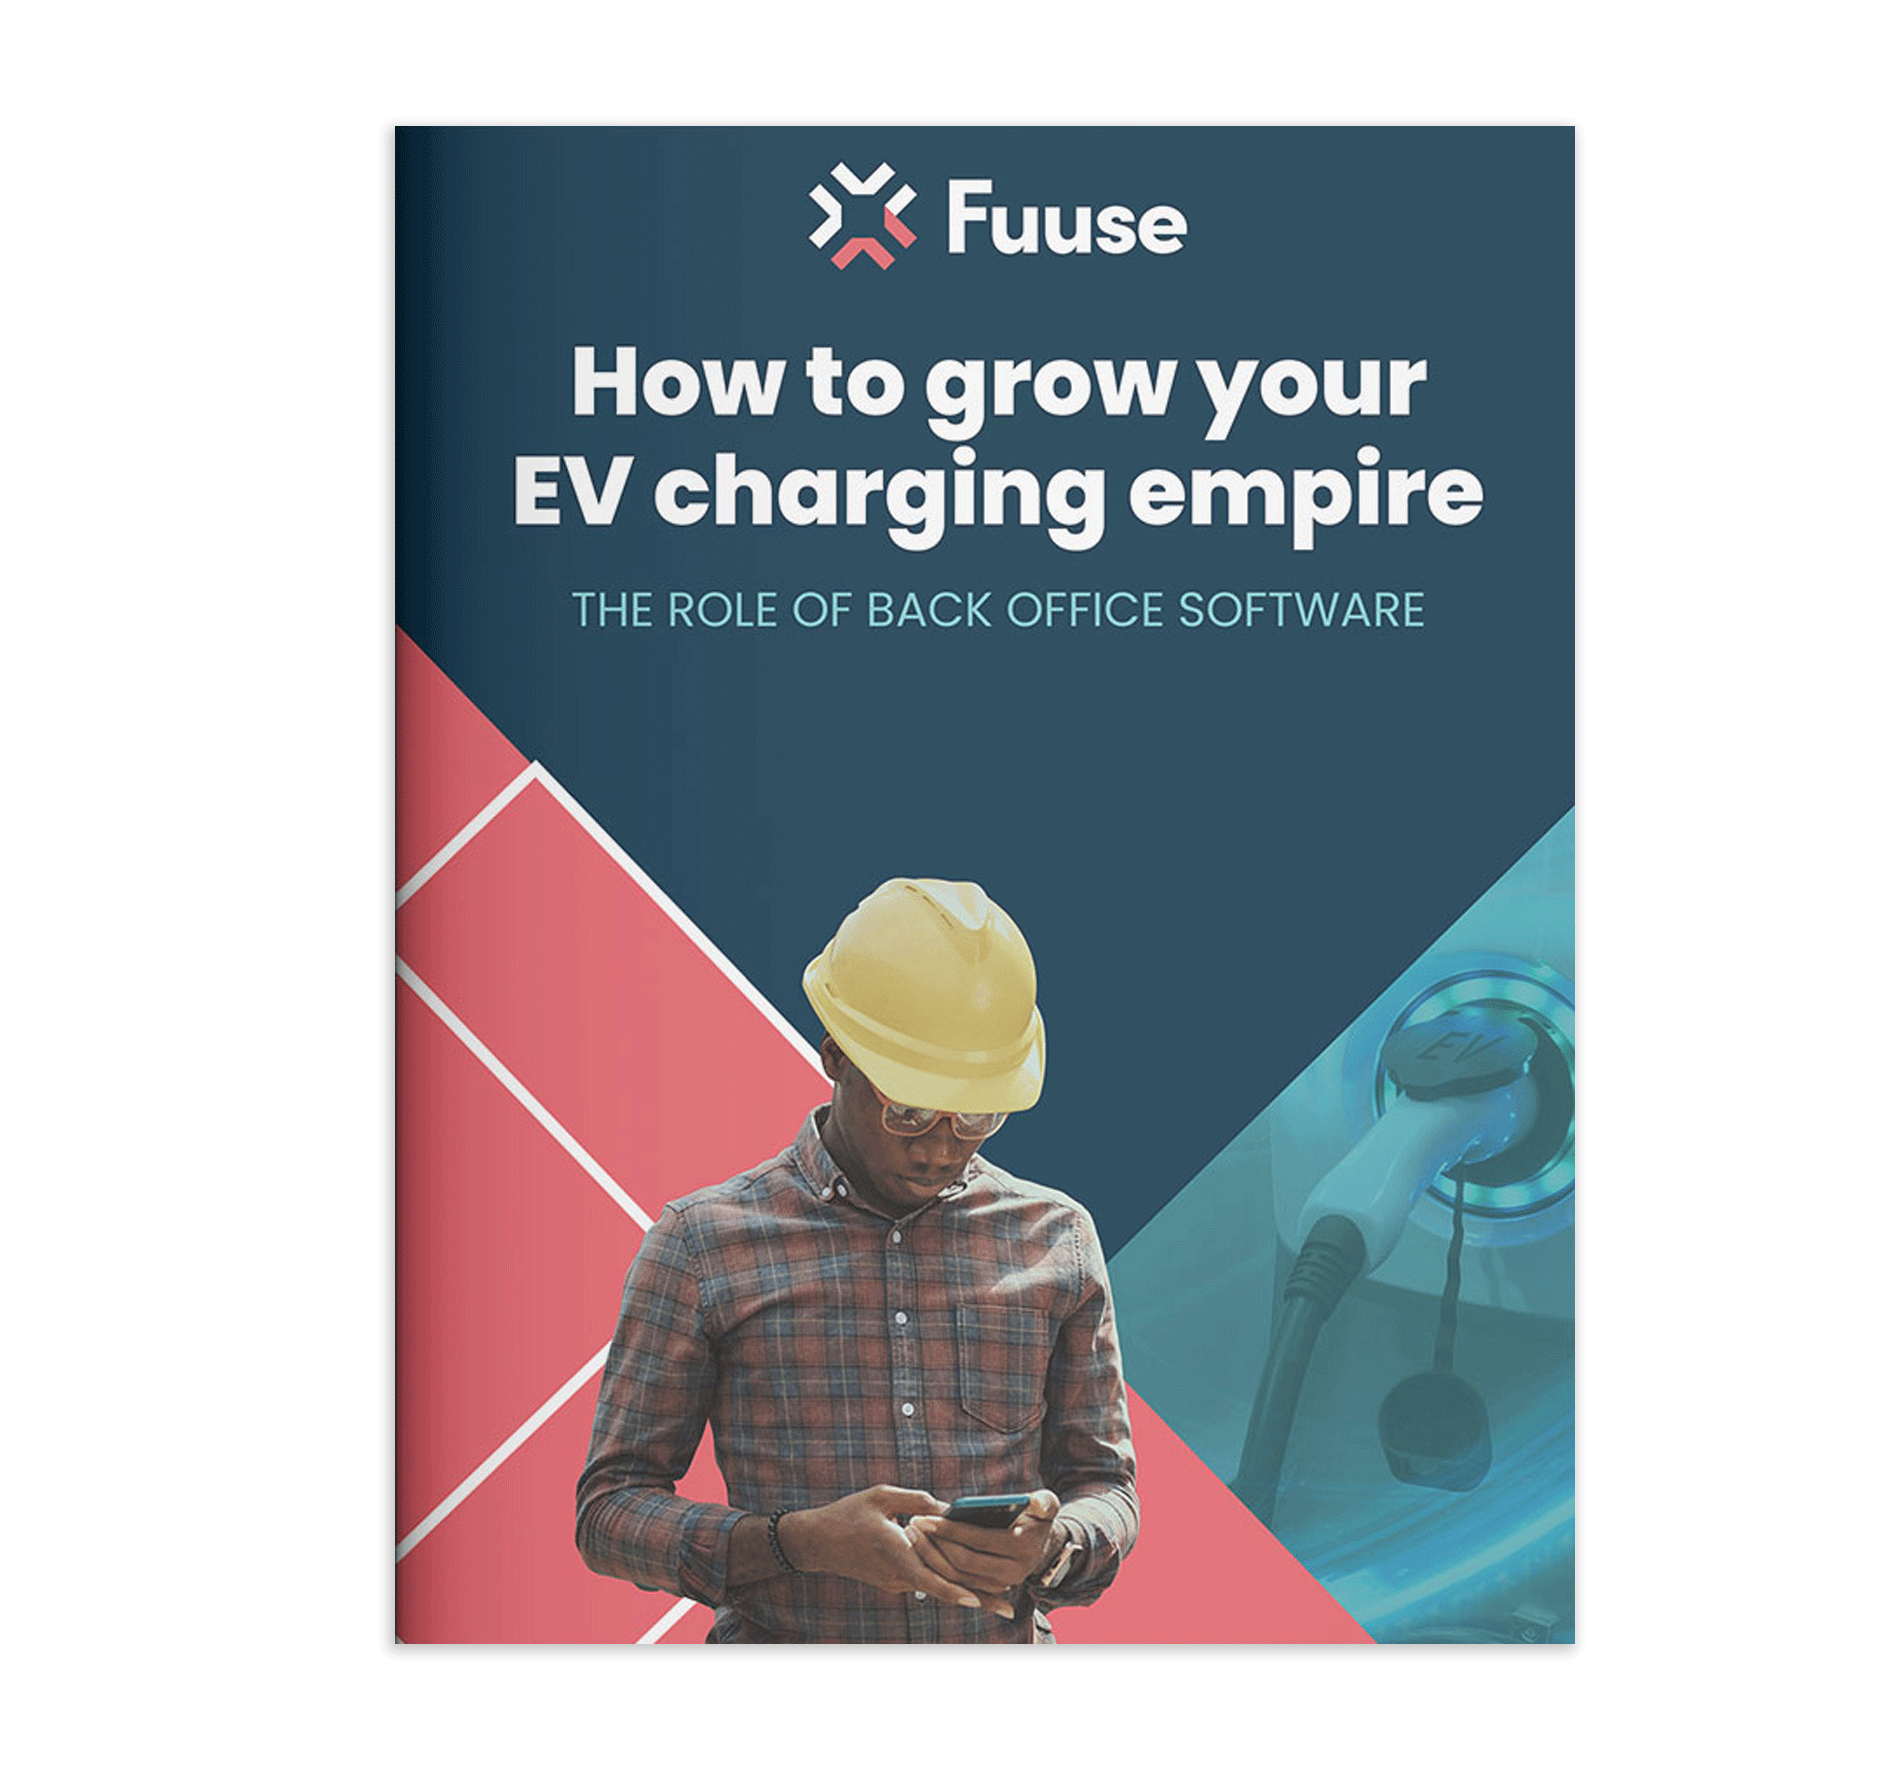 How to grow your EV charging empire guide